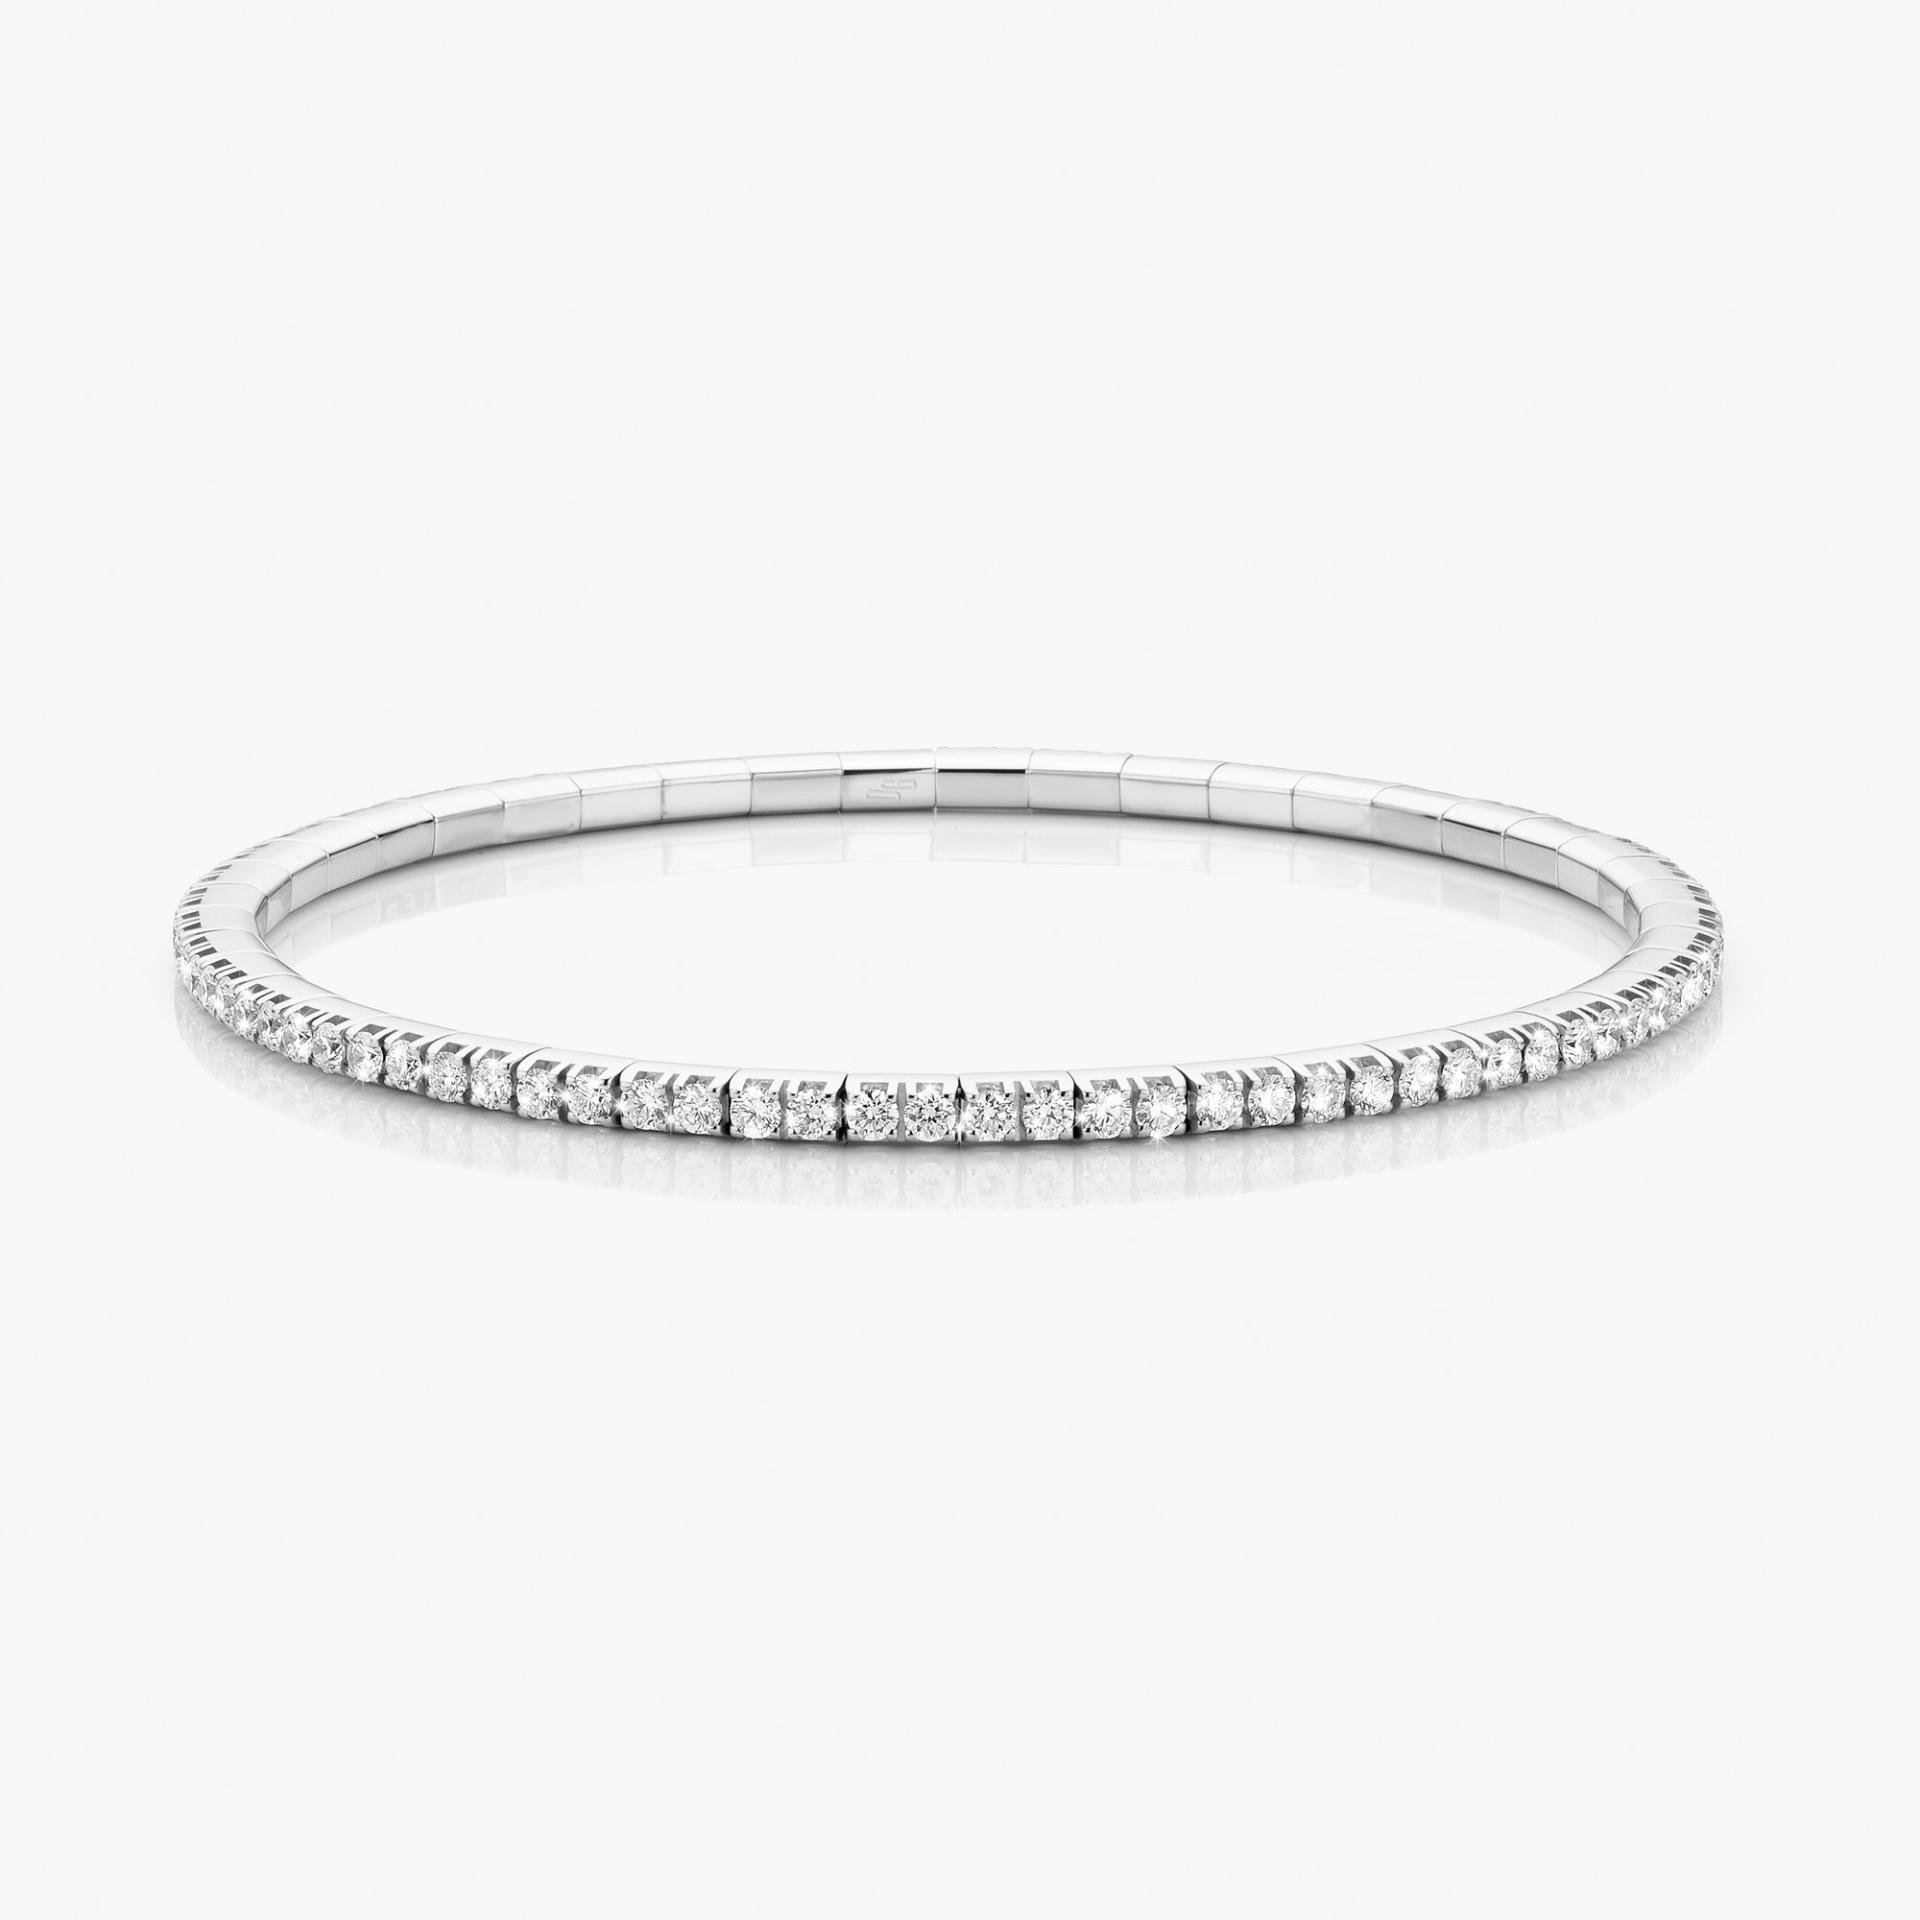 White gold bracelet Extensible set with diamonds made by Demeglio